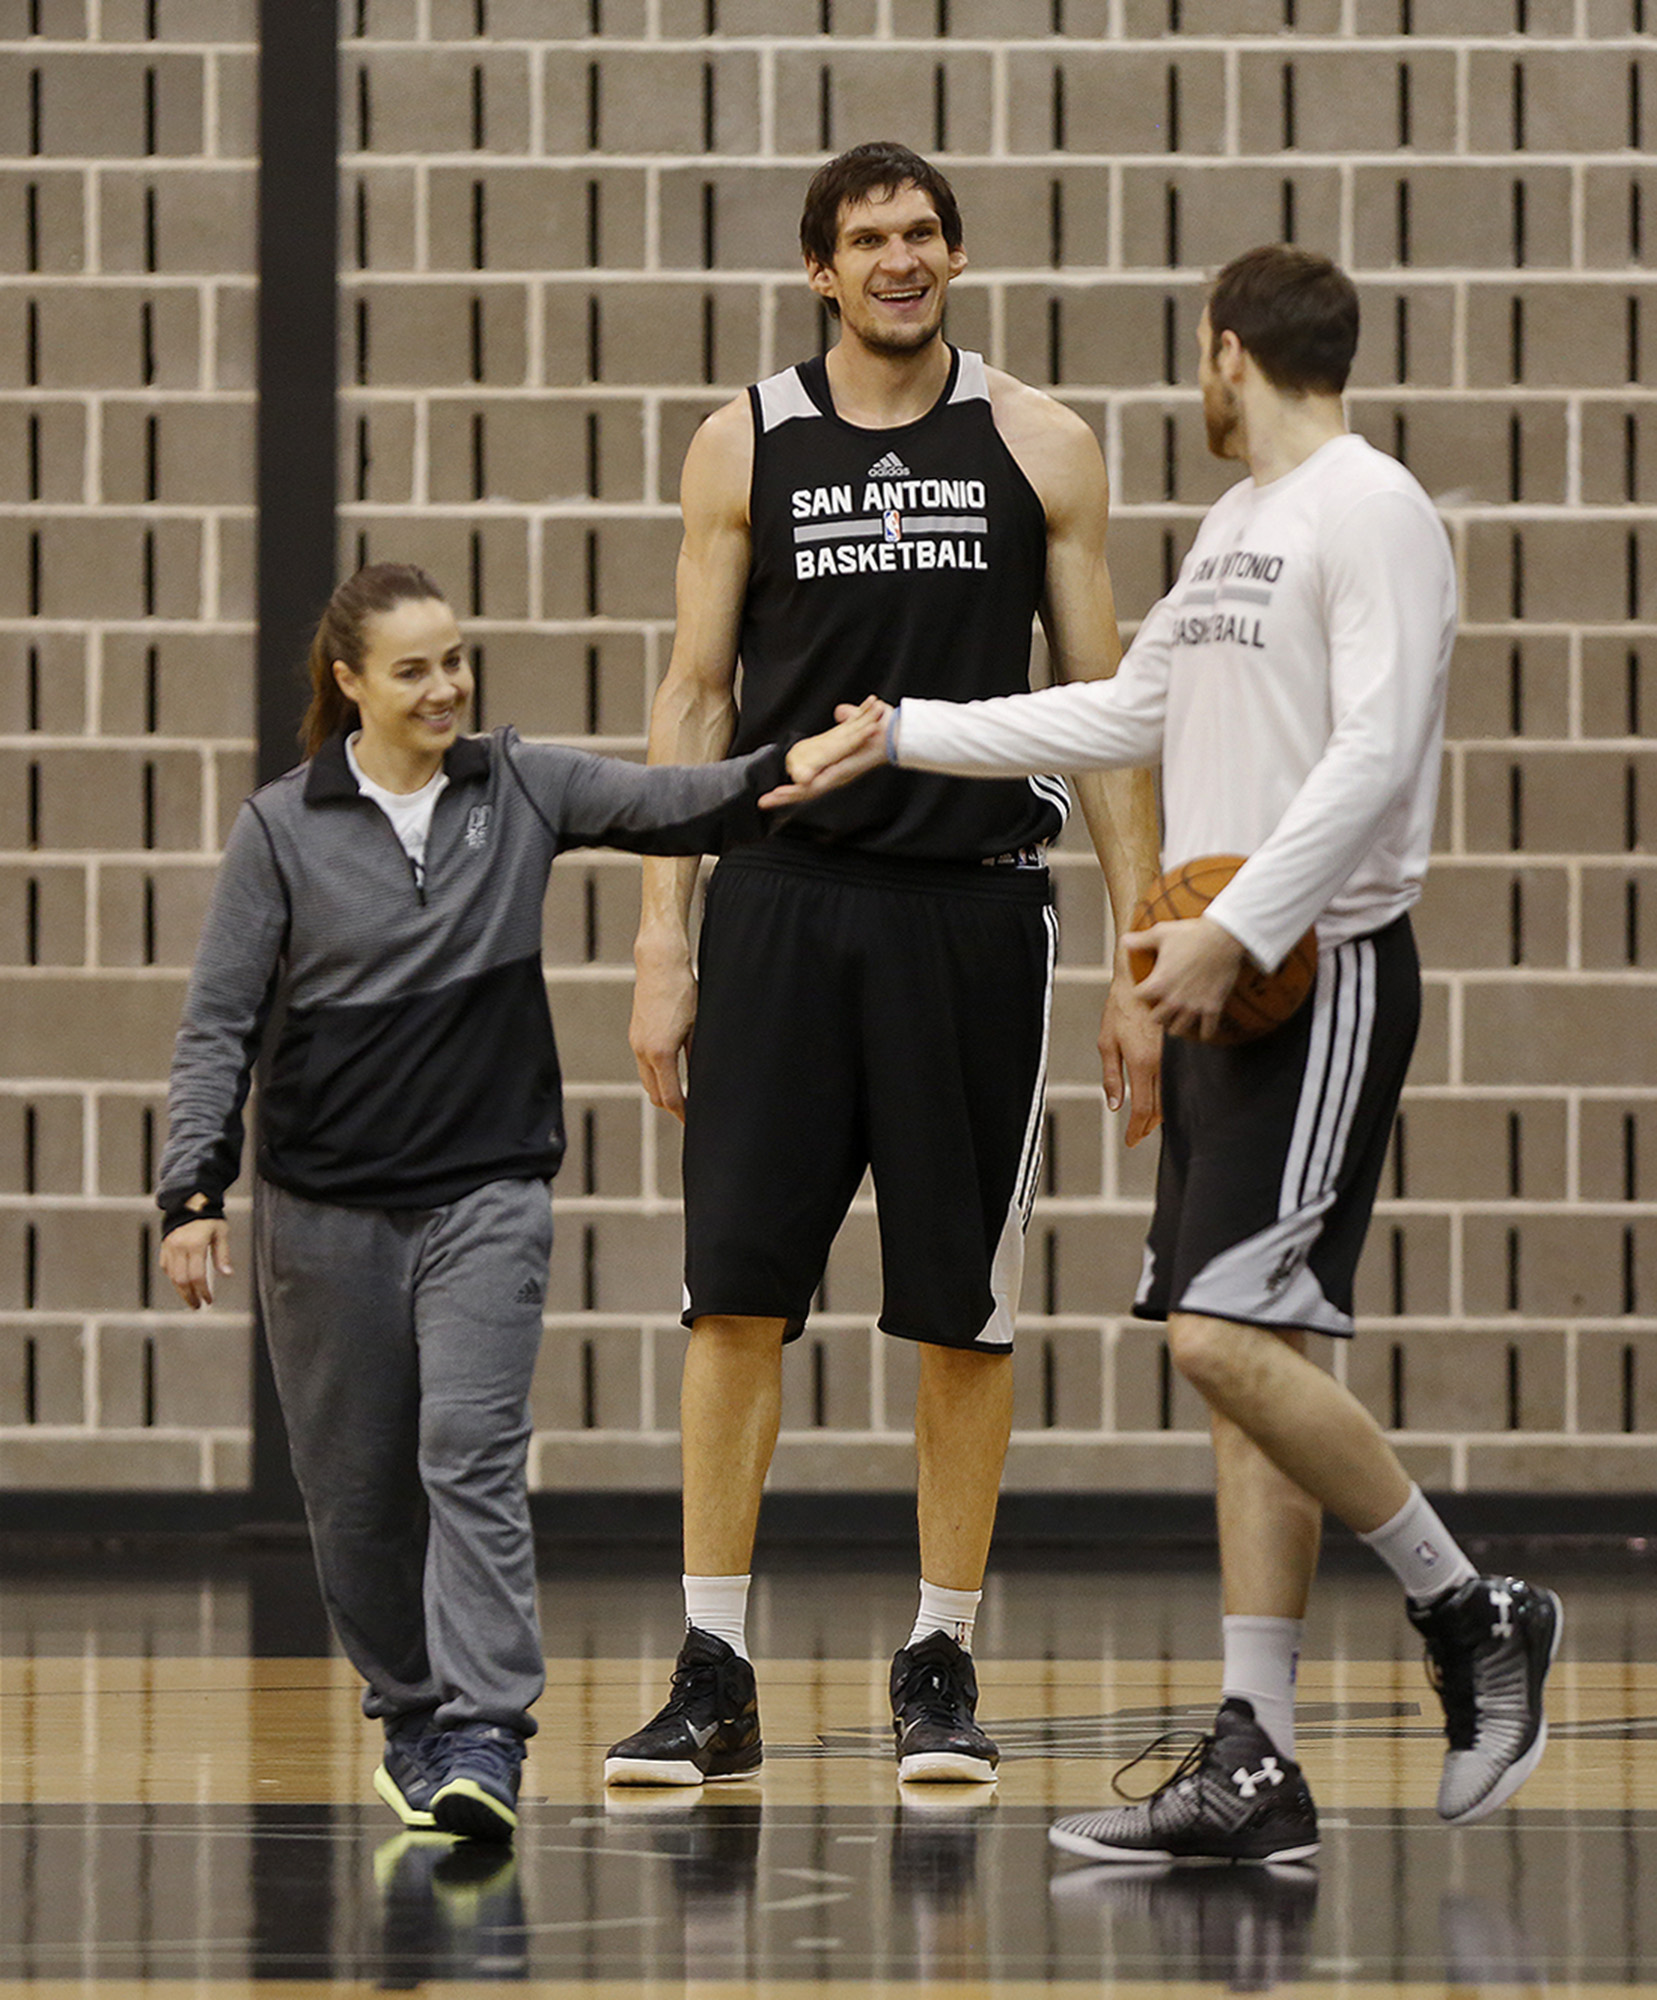 Boban Marjanovic reveals a few of his favorite things: San